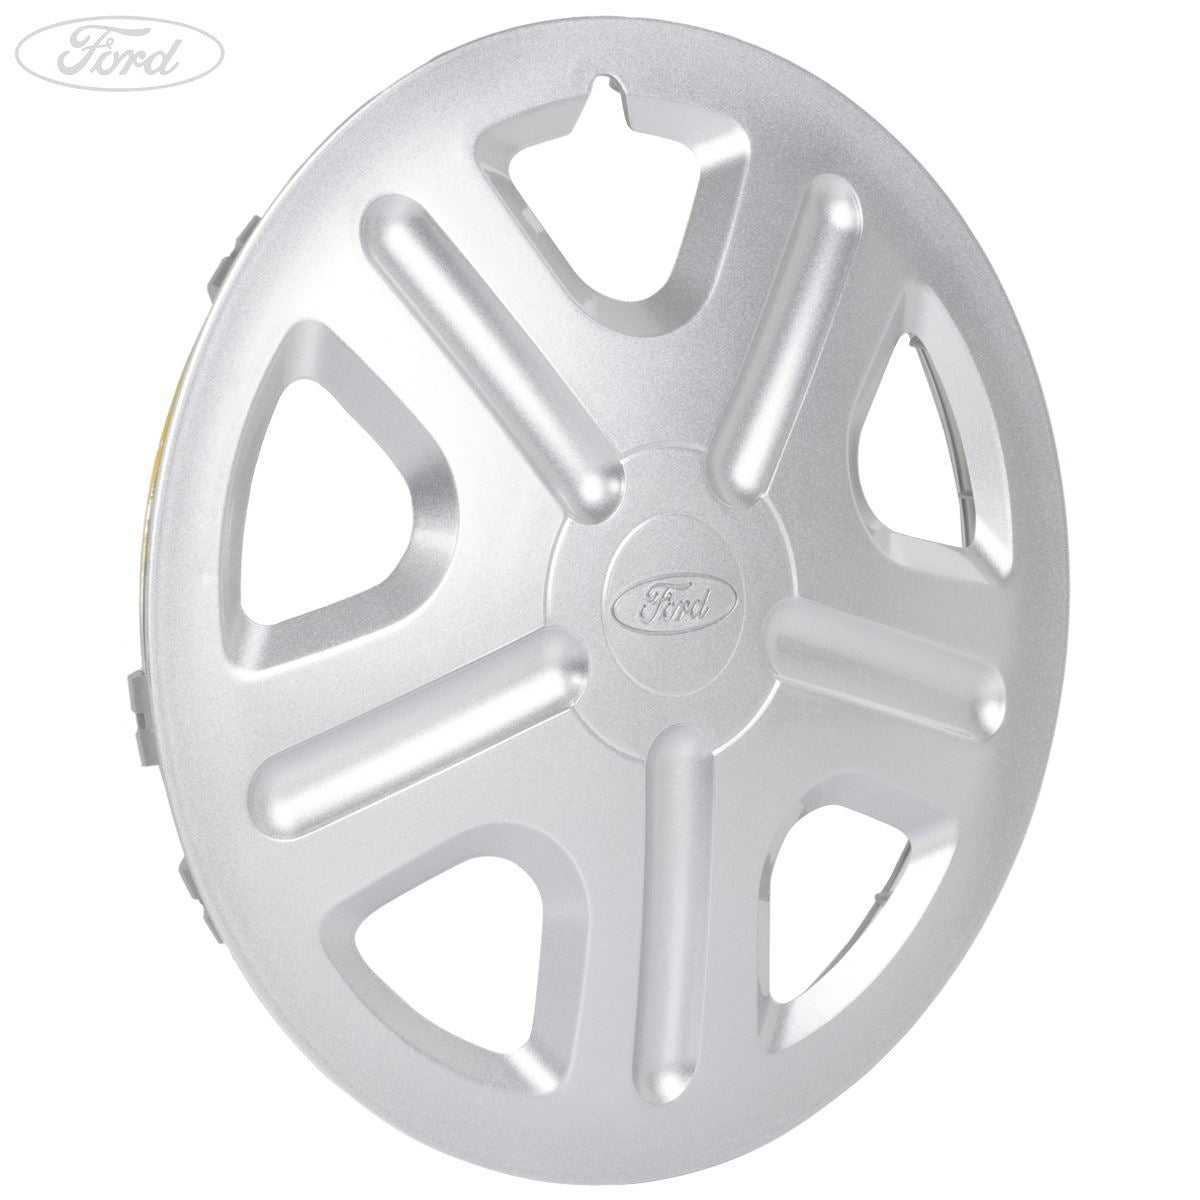 Ford, TRANSIT CONNECT 15" STEEL WHEEL TRIM COVER SILVER X1